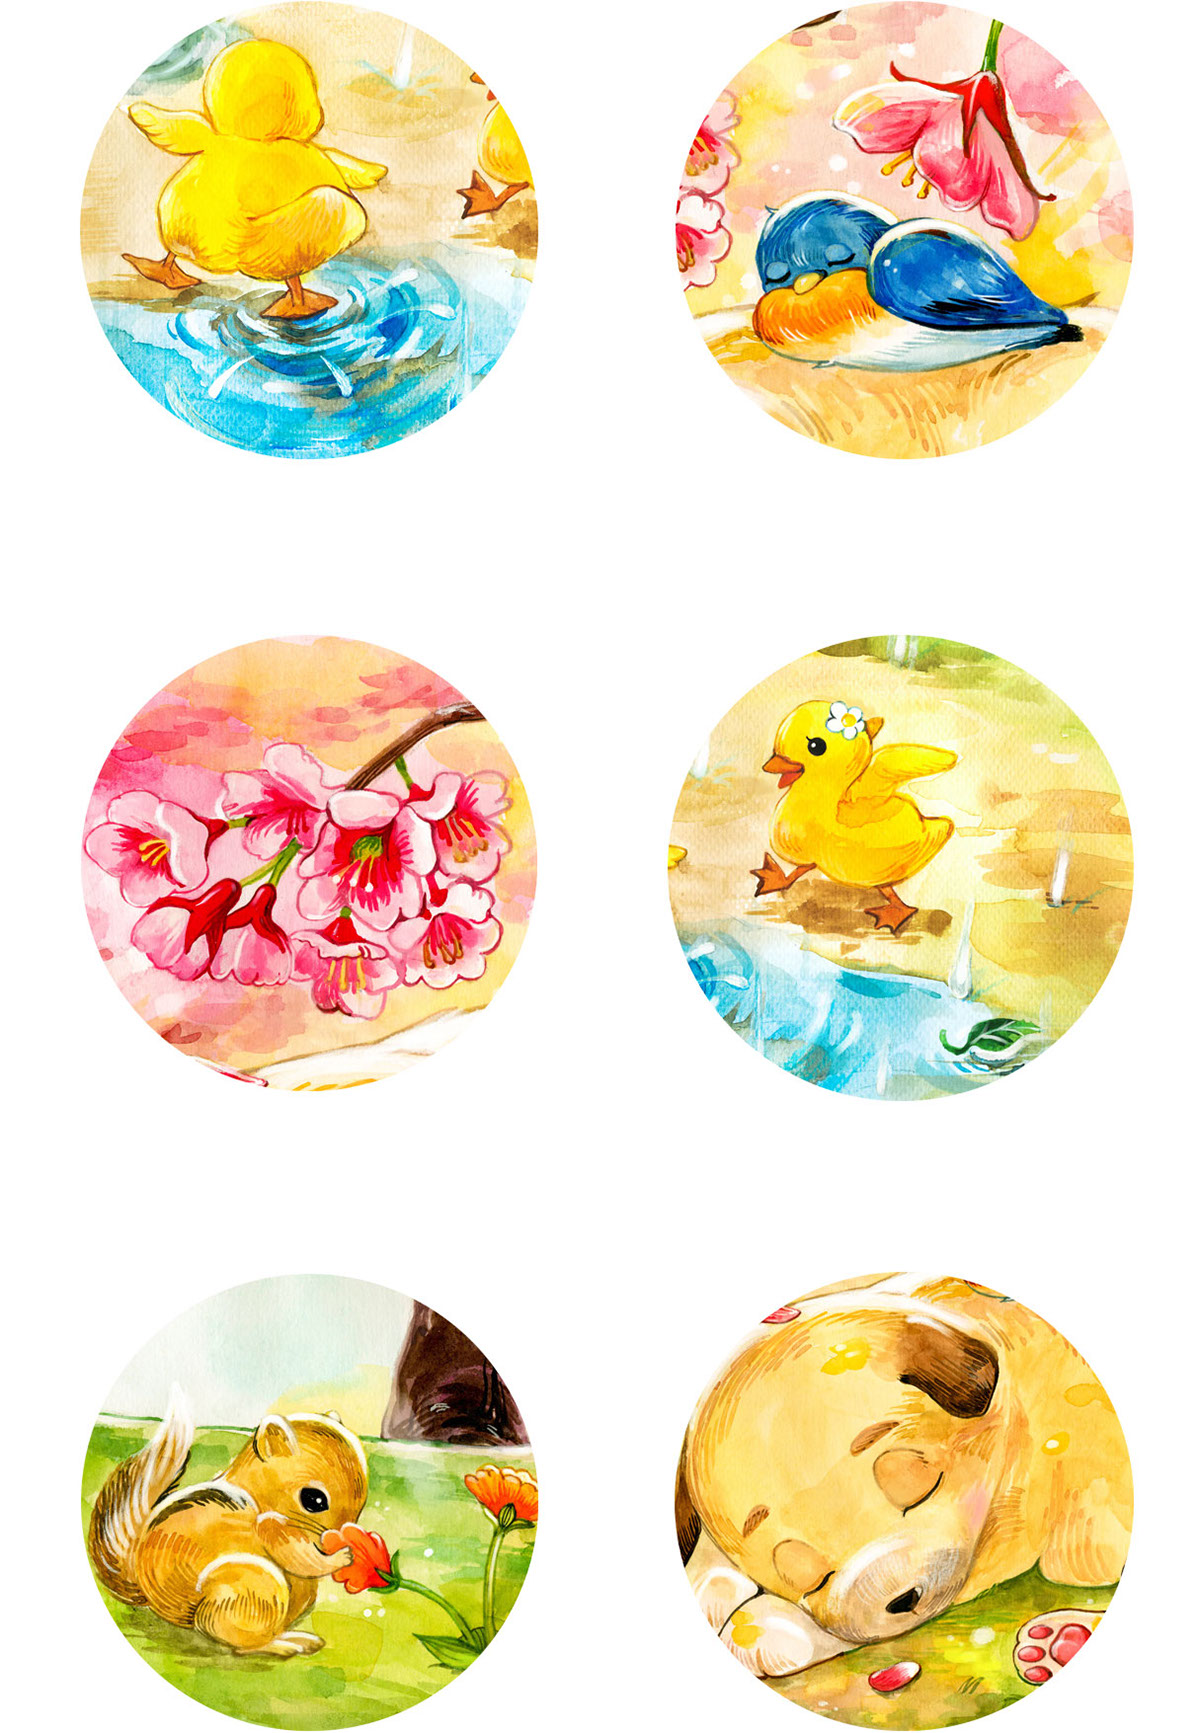 watercolor watercolour butterfly rose flower children's book book illustrations ducks duckling plants dandelion puppy nature painting Cherry Blossom SKY